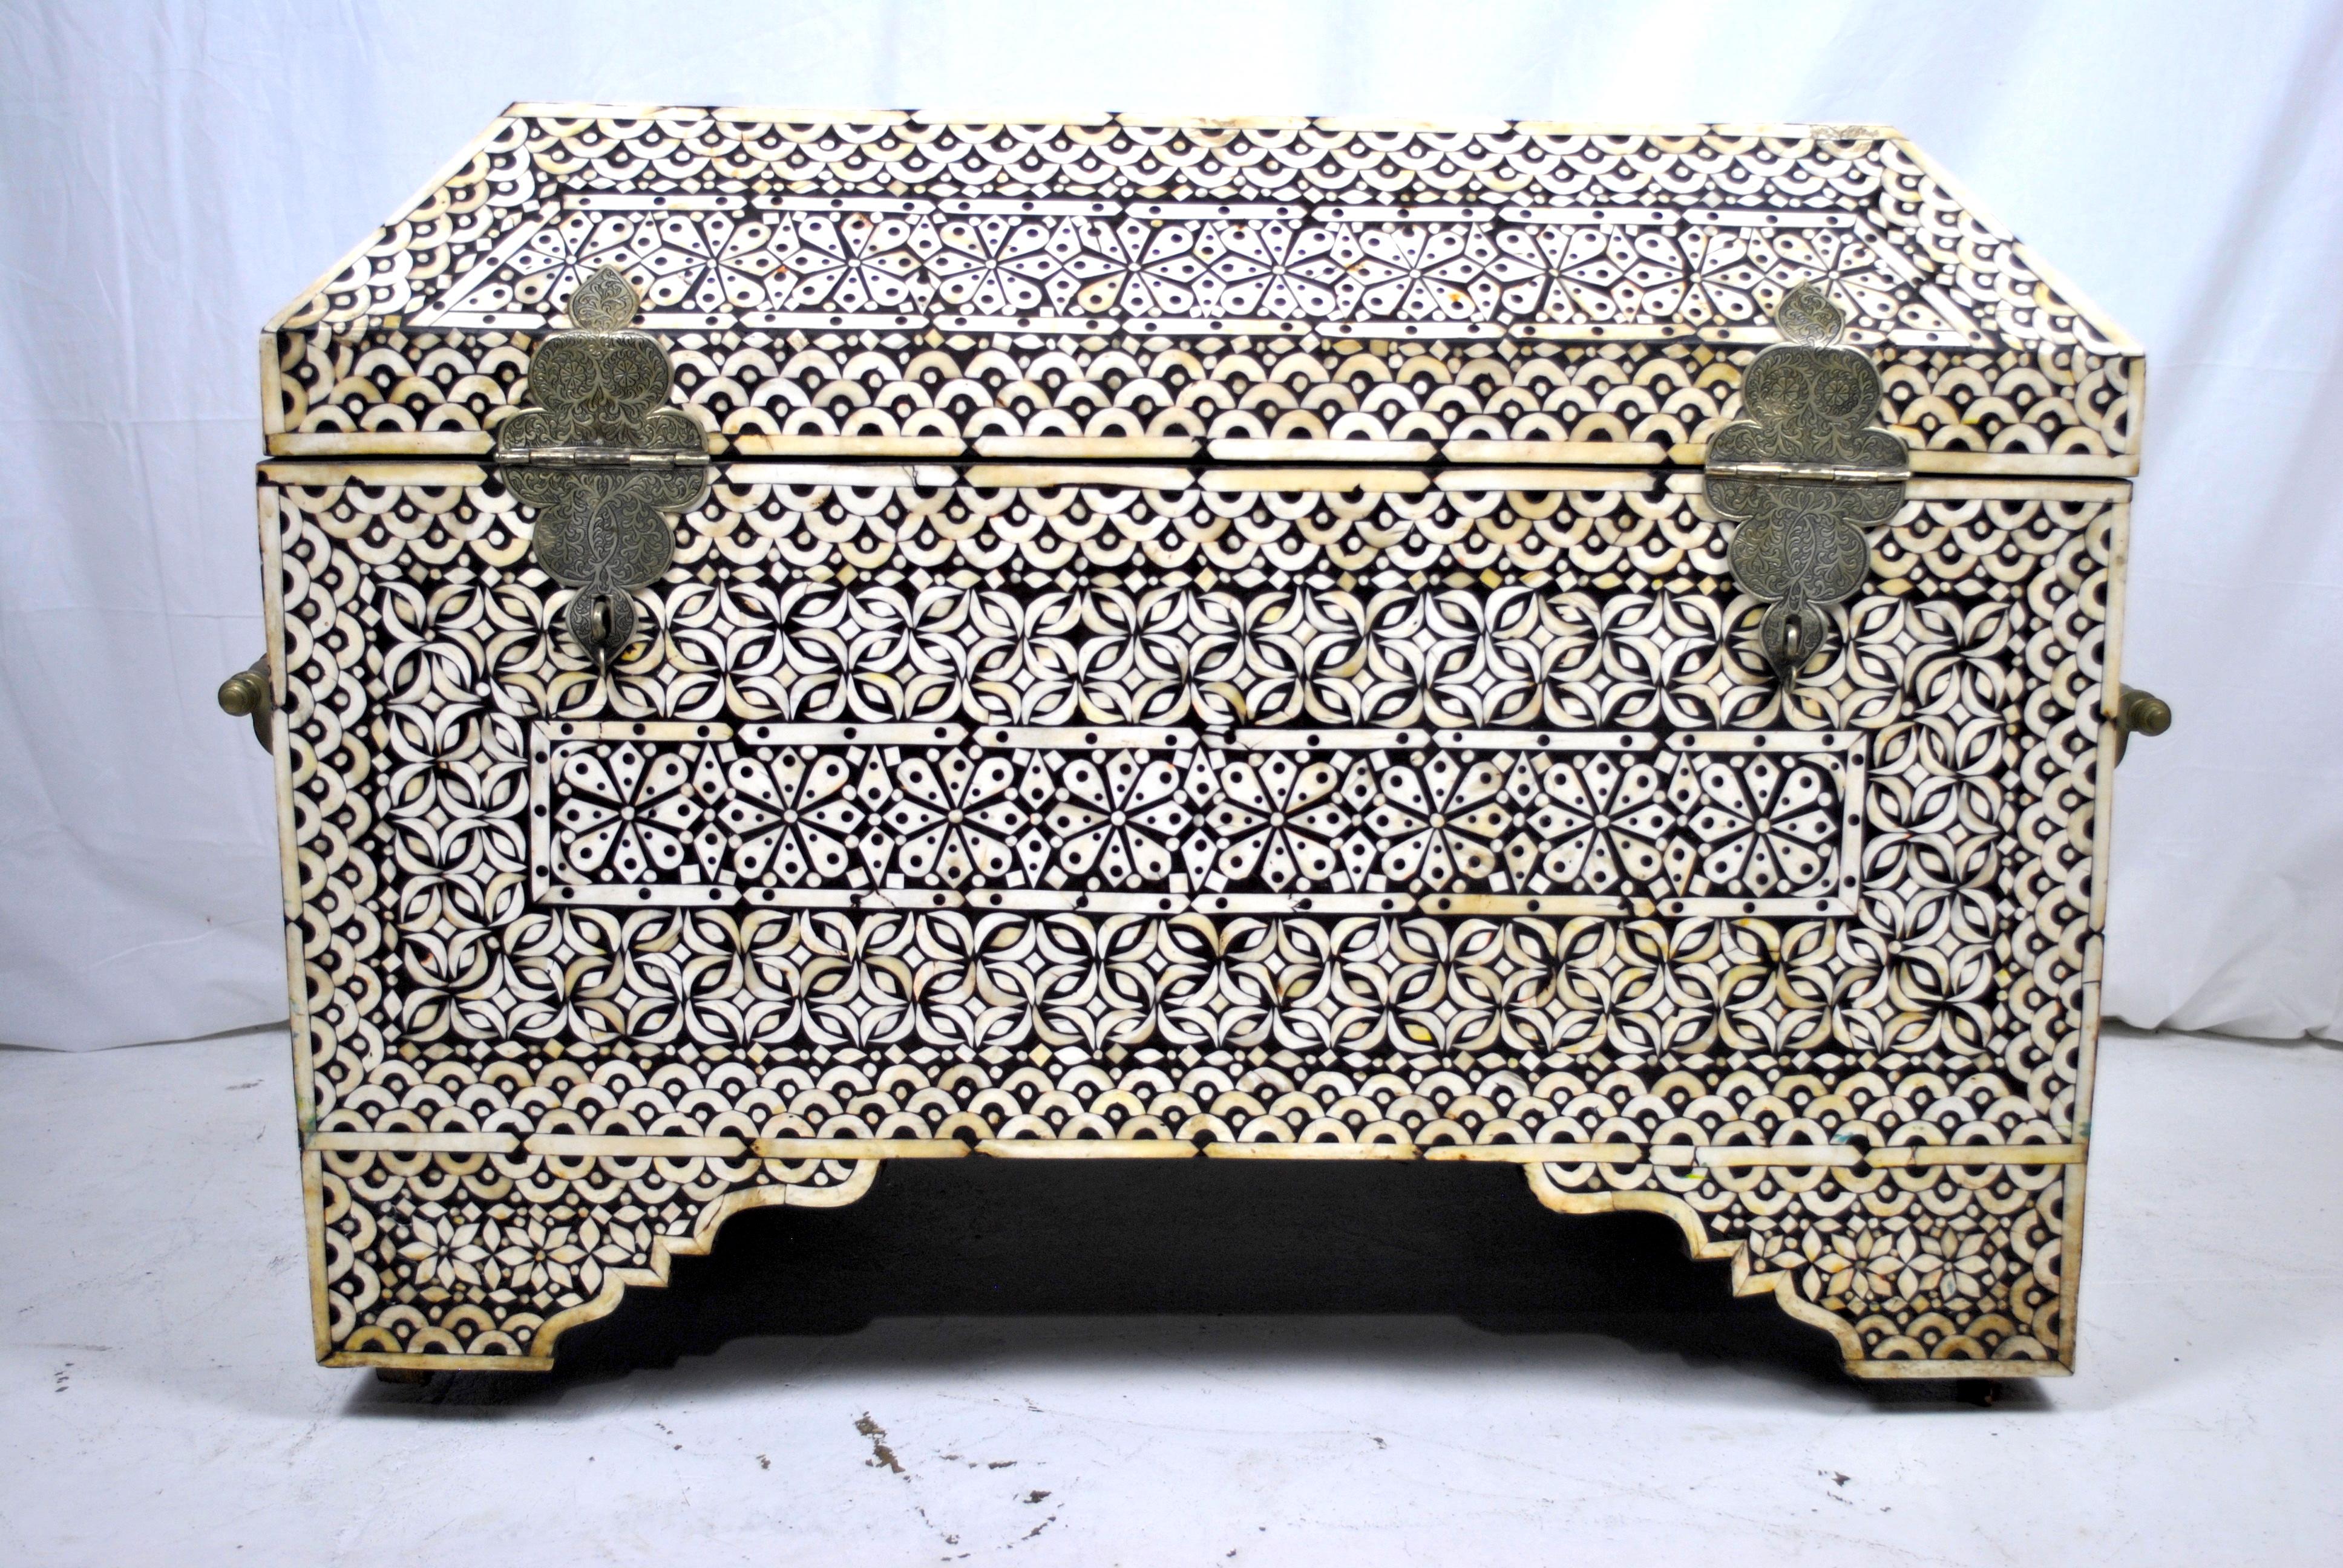 This large 19th century rare Indian ebony and camel bone inlay treasure chest / casket/ box, of rectangular form with hinged lid, scooped tapered feet, silver embossed foliate lock and hinges. The handles are tooled brass. The sides decorated with